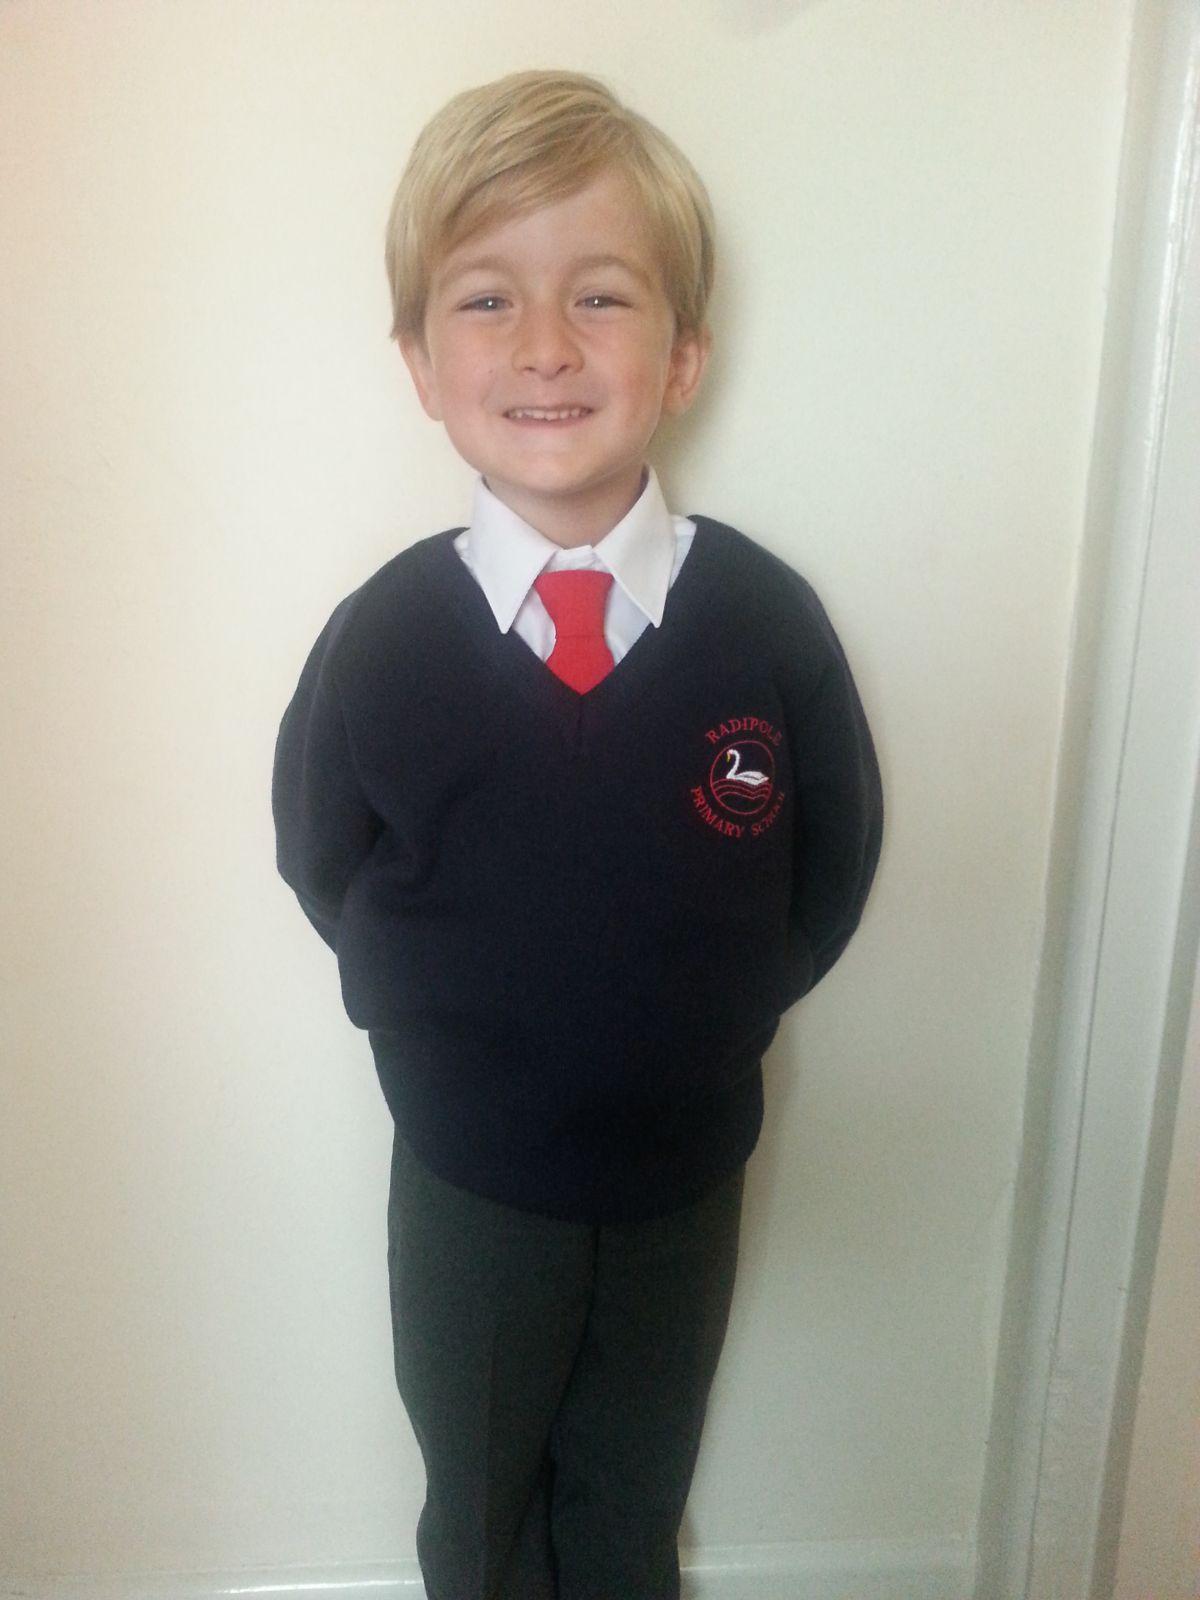 Back to School - Joshua Dixon started reception class at Radipole Primary - Picture by Sophie Penny